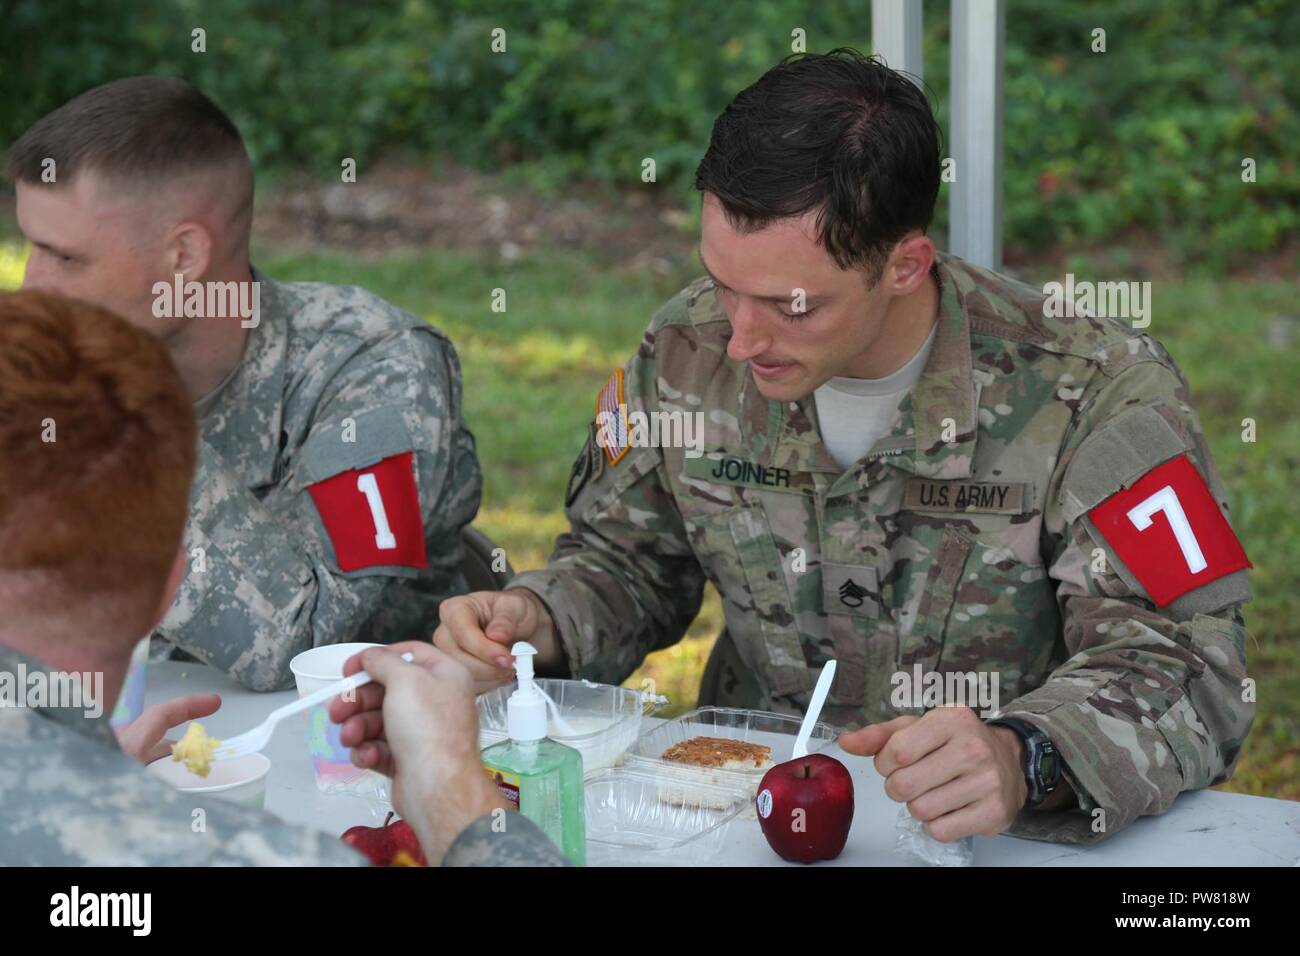 U.S. Army Staff Sgt. Eric Joiner, assigned to the Lyster Army Community Hospital, eats first hot meal after completing the 2017 Best Medic Competition at Fort Bragg, N.C., Sept. 20, 2017. The competition tested the physical and mental toughness, as well as the technical competence, of each medic to identify the team moving forward to represent the region at the next level of the competition. Stock Photo